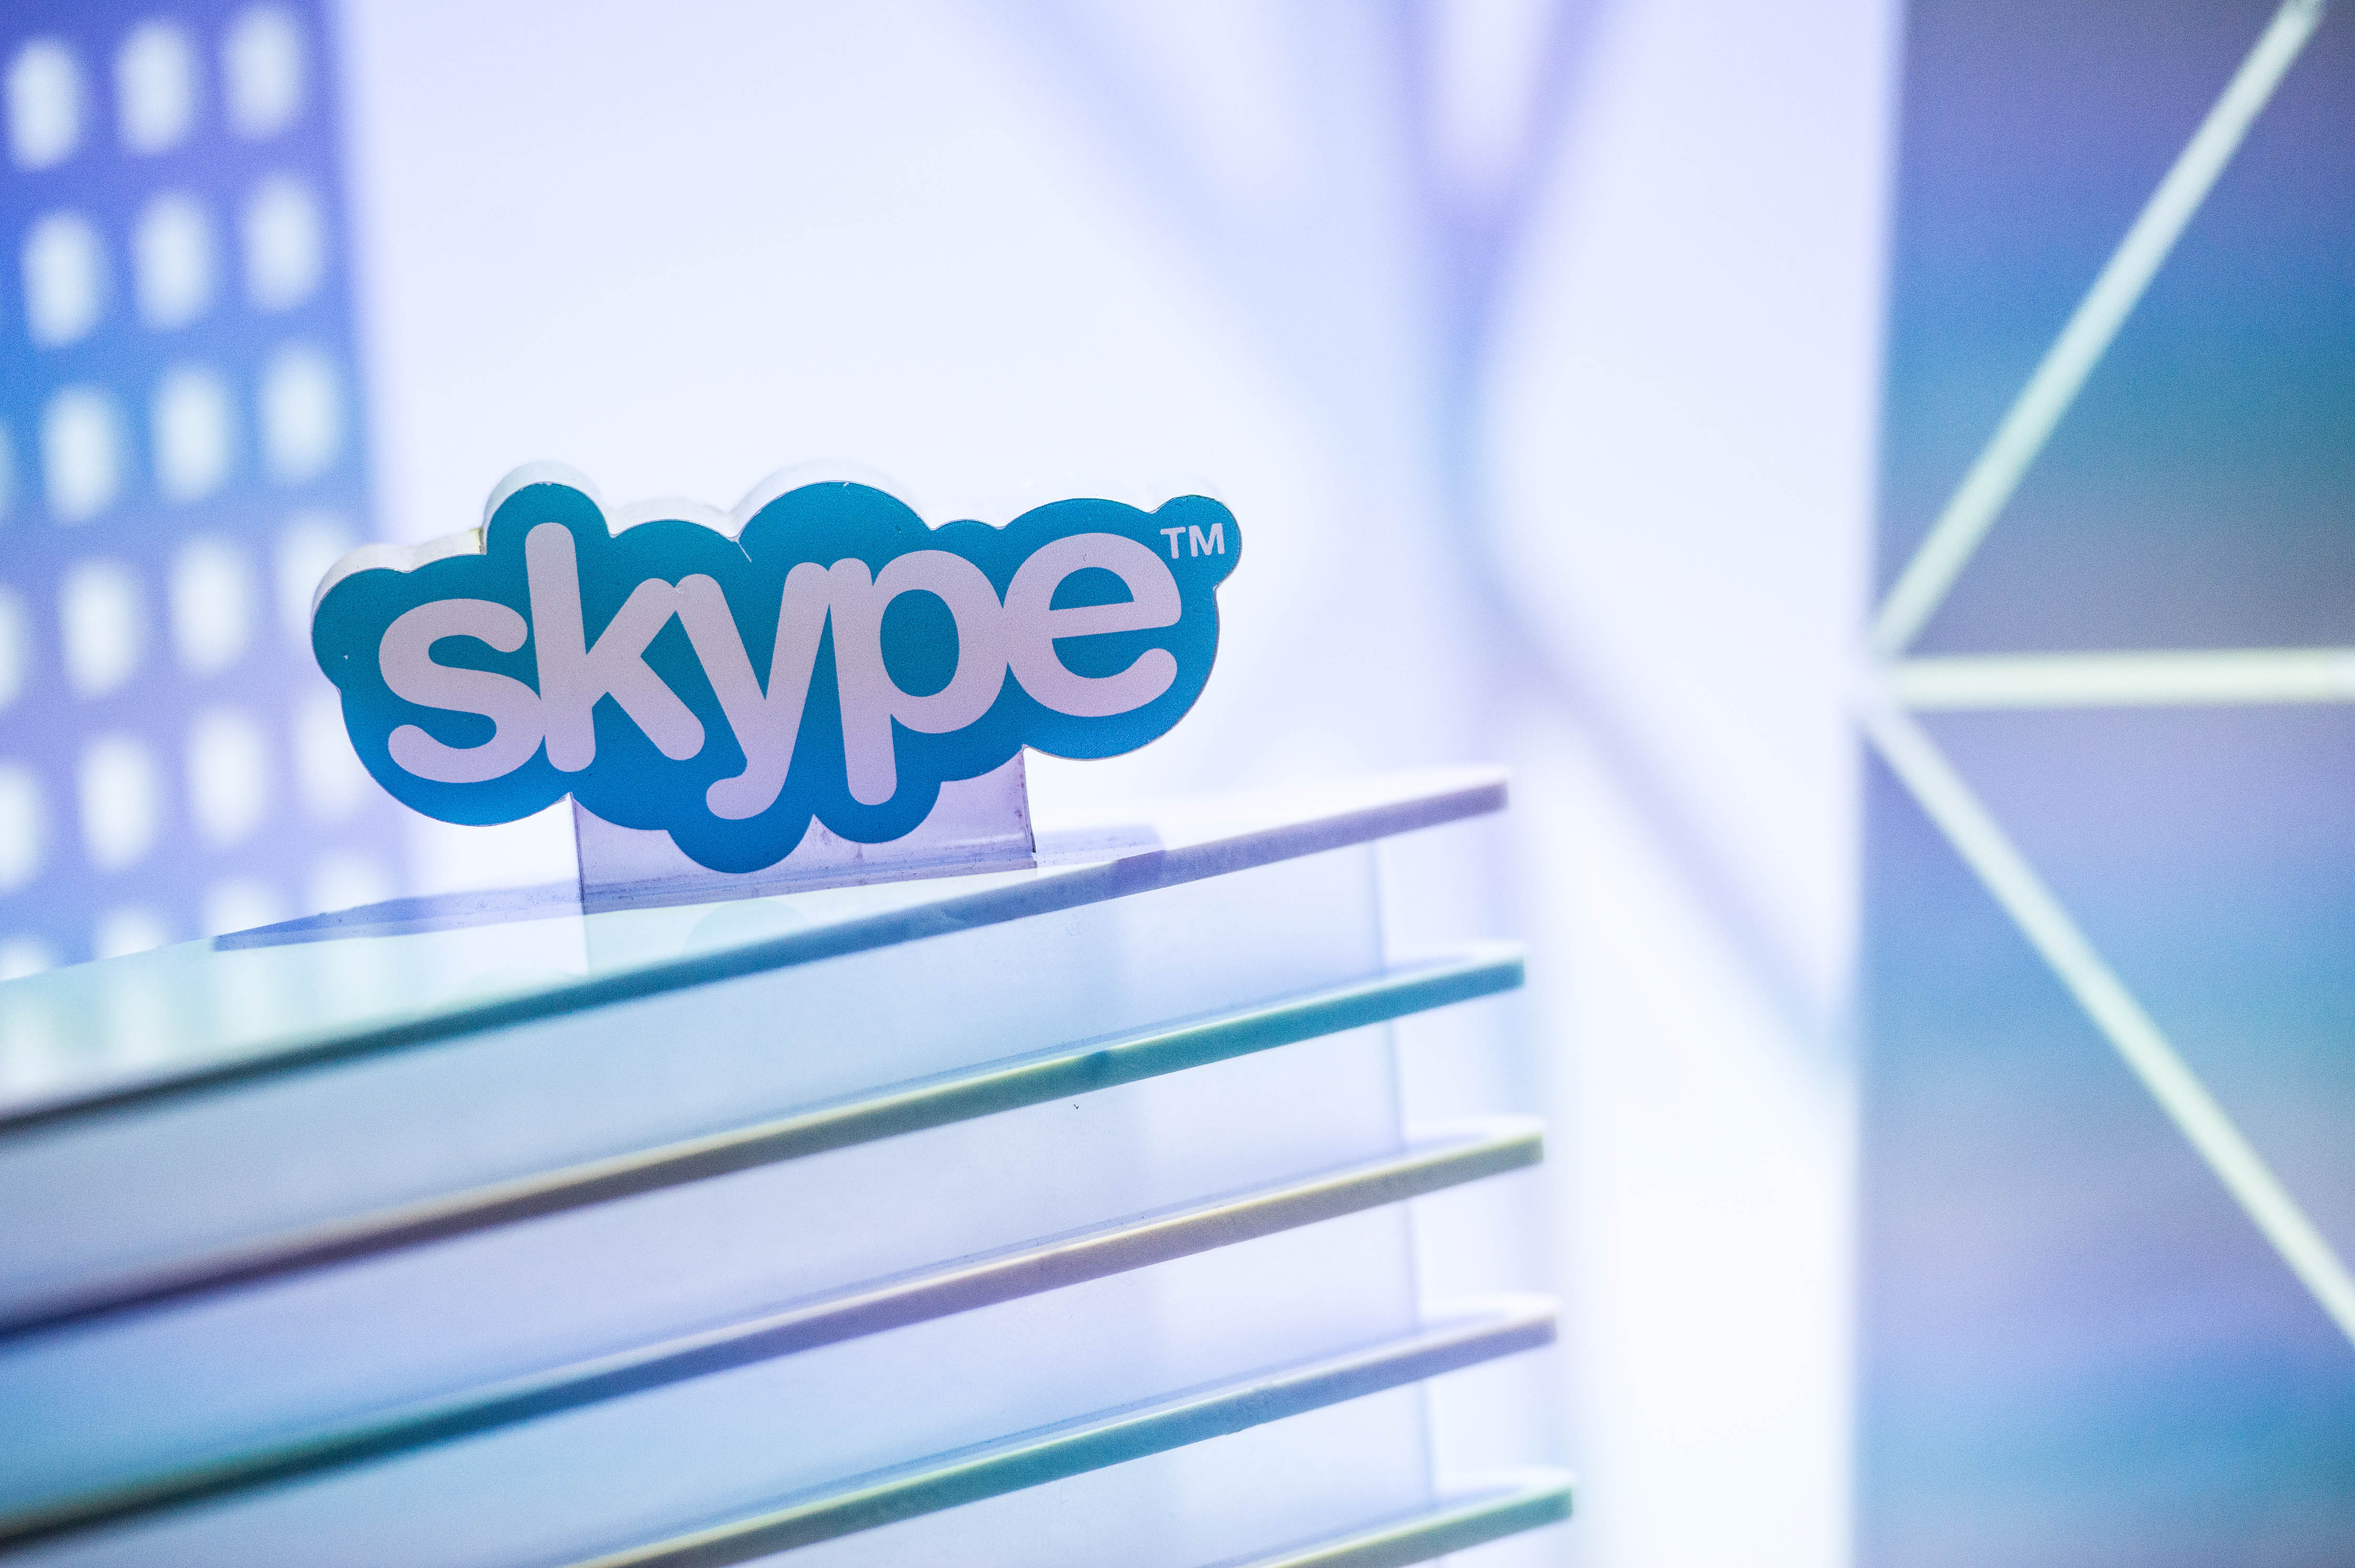 A Skype logo is seen at the Microsoft pavilion during the second day of the Mobile World Congress 2015 at the Fira Gran Via complex on March 3, 2015 in Barcelona, Spain. (David Ramos&mdash;Getty Images)